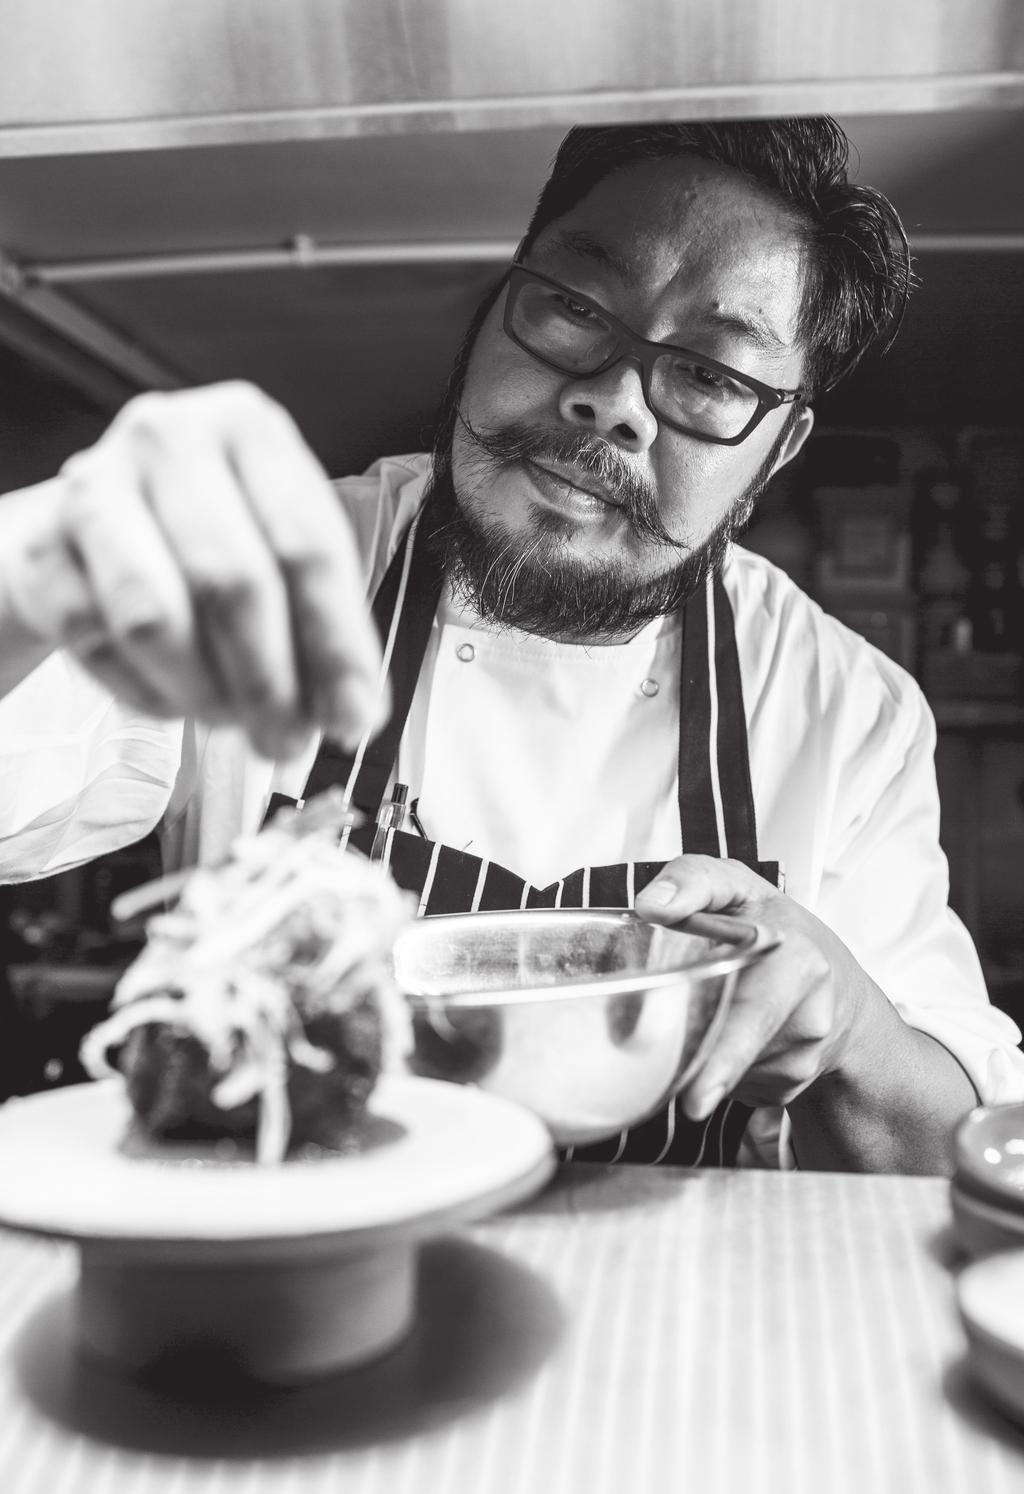 Our Head Chef Jonathan Villar has created his own sensational versions of iconic East Asian dishes. Experience our highly celebrated signature dishes found throughout this menu.